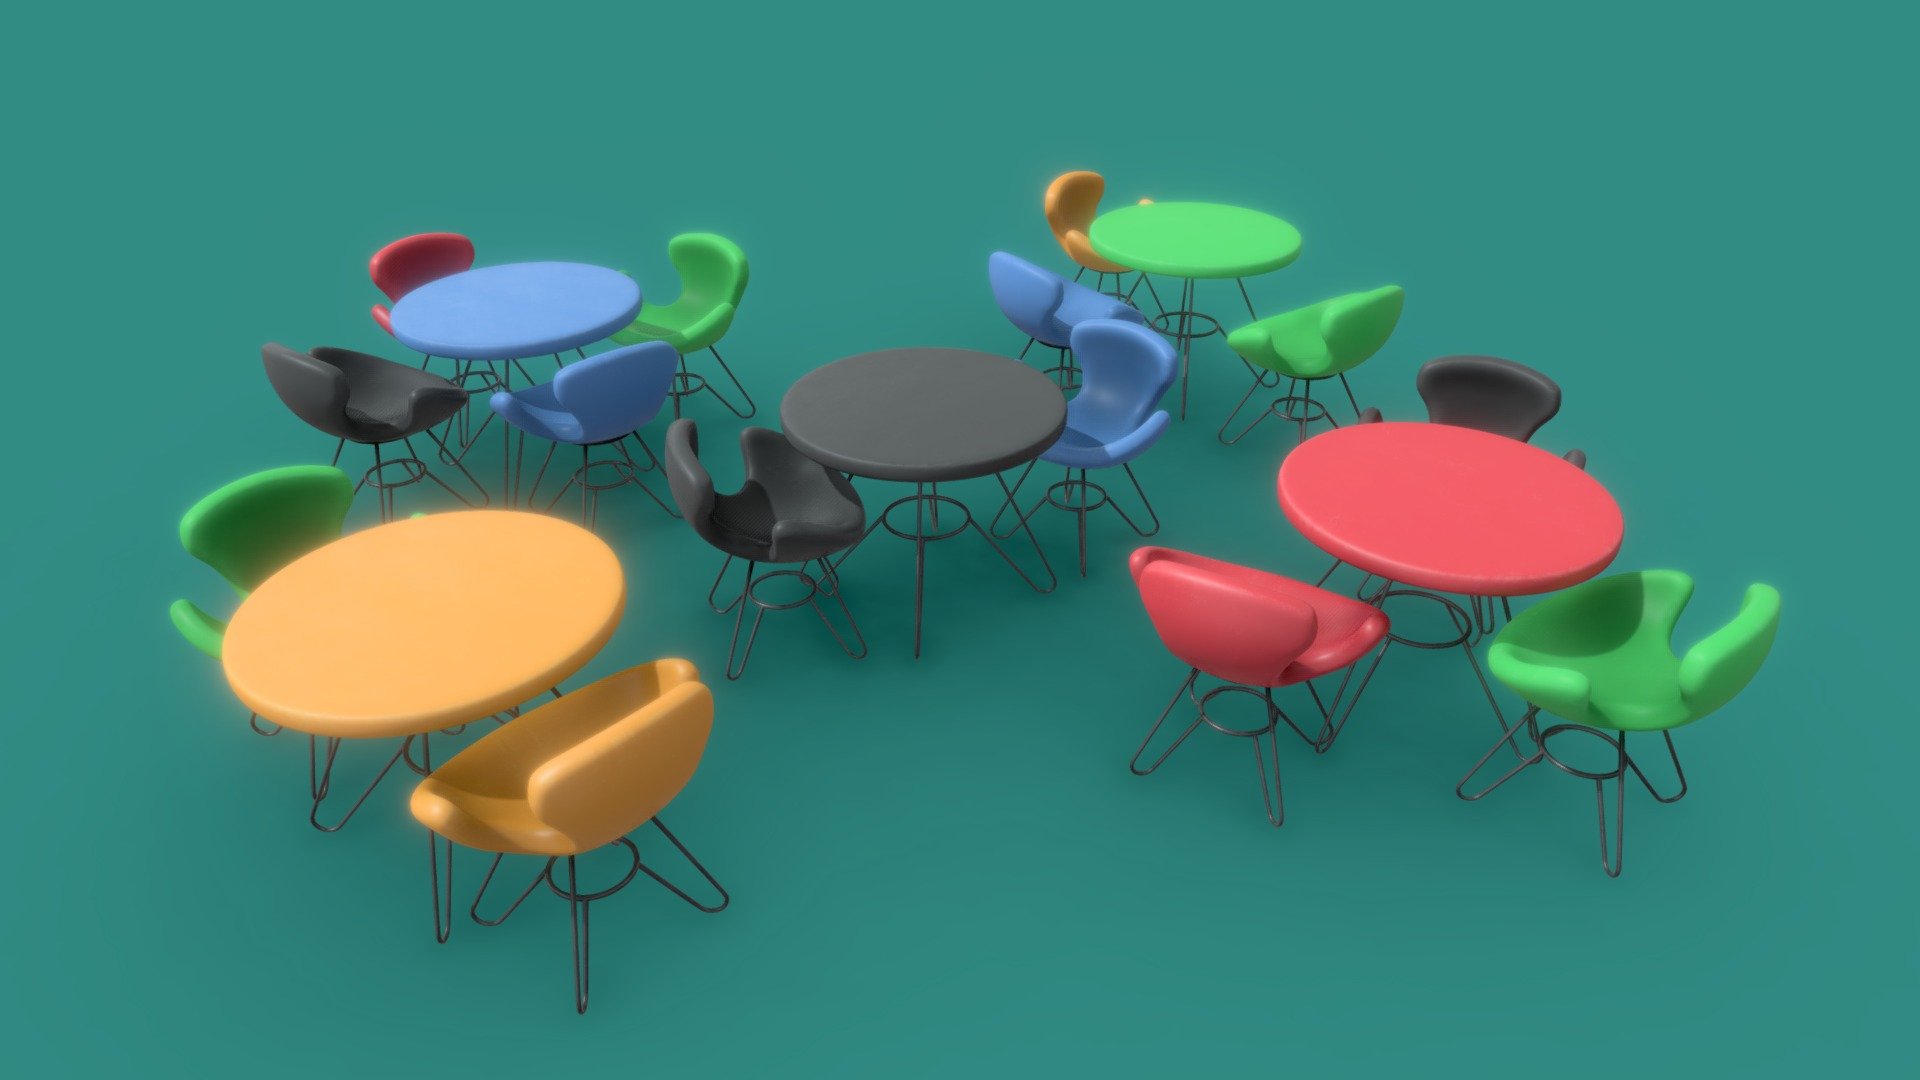 hey, i made Akken Plastic Cafe Exterior Chair &amp; Table, kind a nice for your scene. 2048px texture PBR. 

also i have free stuff for download please cek my page account, and follow for future upload.

in collaboration with Monqo Studio please check our store our website &ndash;&gt;  http://monqo.net/

looking for freelance 3D artist for your mobile game? Feel free to ask me by email feral.fe2@gmail.com

oh… if you want, i post several progress in my instagram @ferozes

And check out my game on googleplay —&gt; https://play.google.com/store/apps/details?id=com.Unlimit.LetsRoad

thank you for supporting me, have nice scene :D - Akken Plastic Cafe Exterior Chair & Table - Buy Royalty Free 3D model by ferofluid 3d model